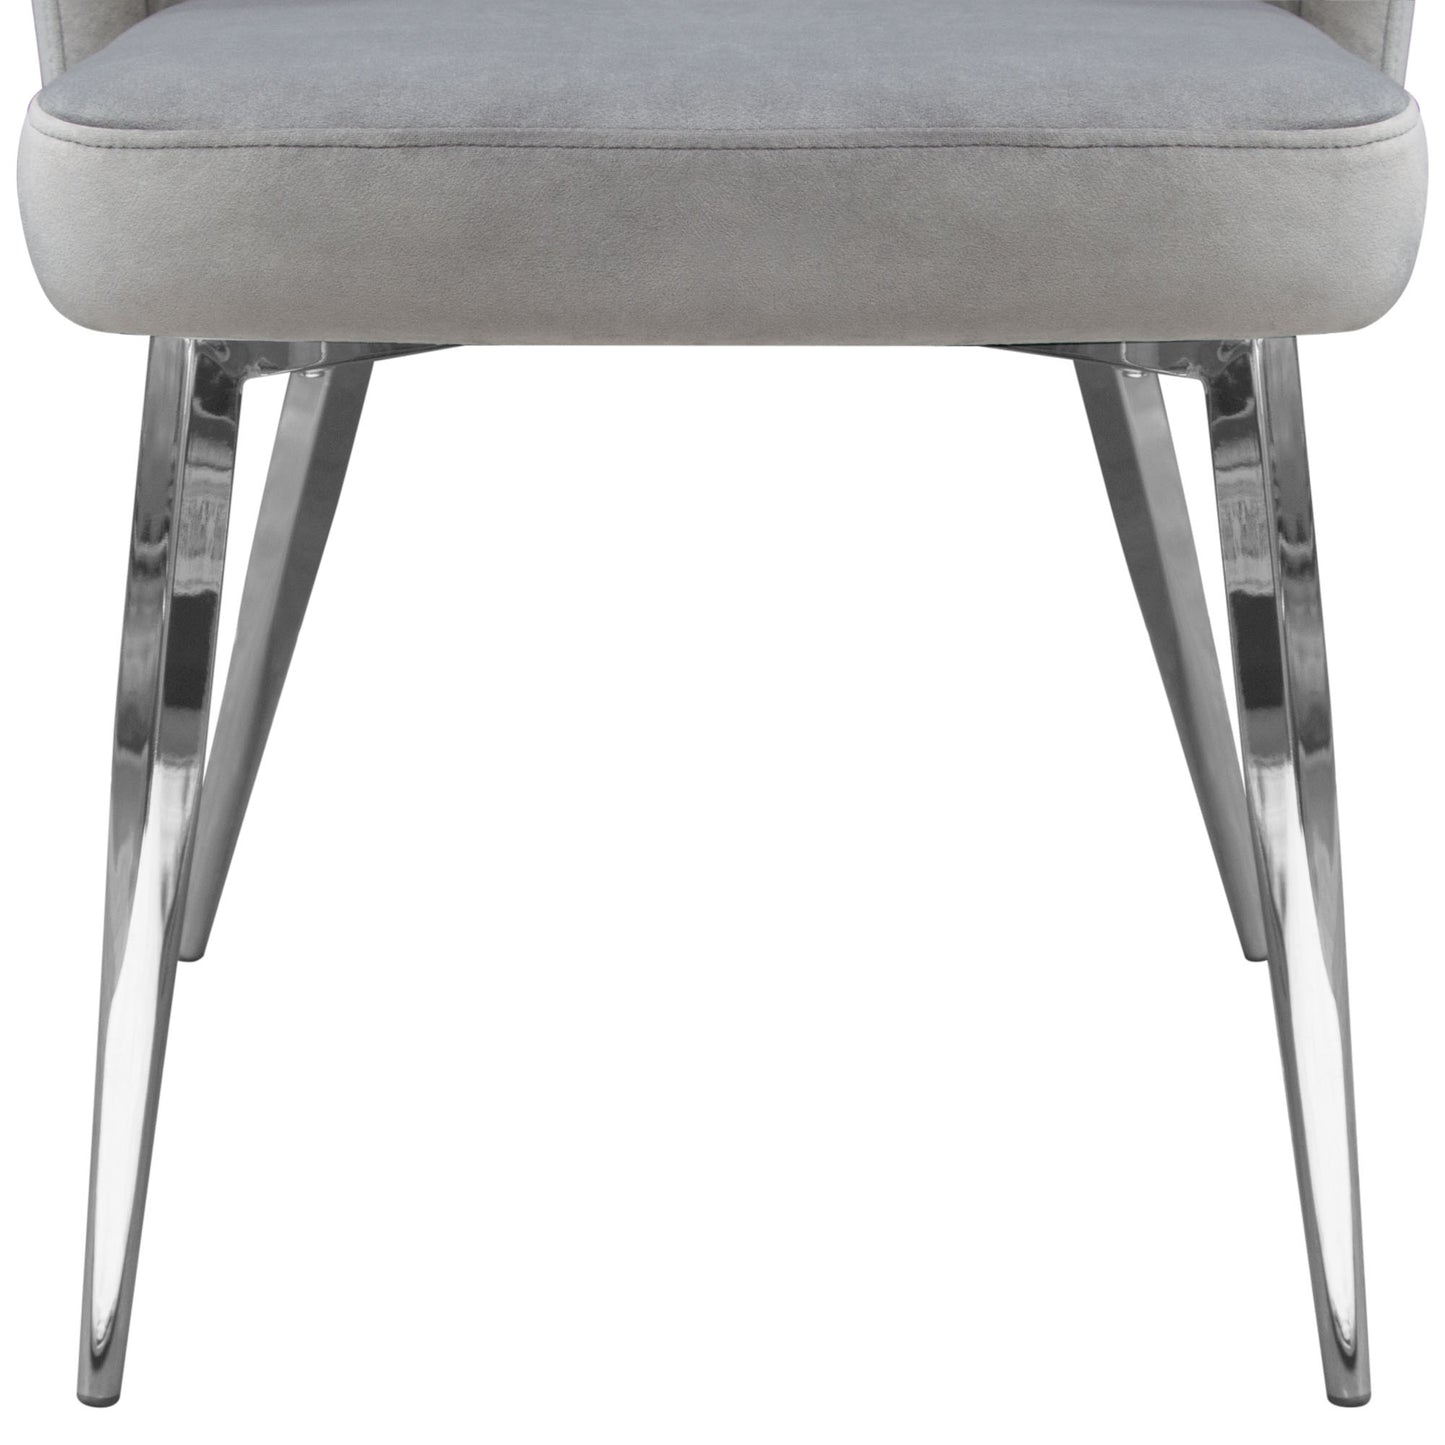 Grace Set of Two Dining Chairs in Grey Velvet w/ Chrome Legs